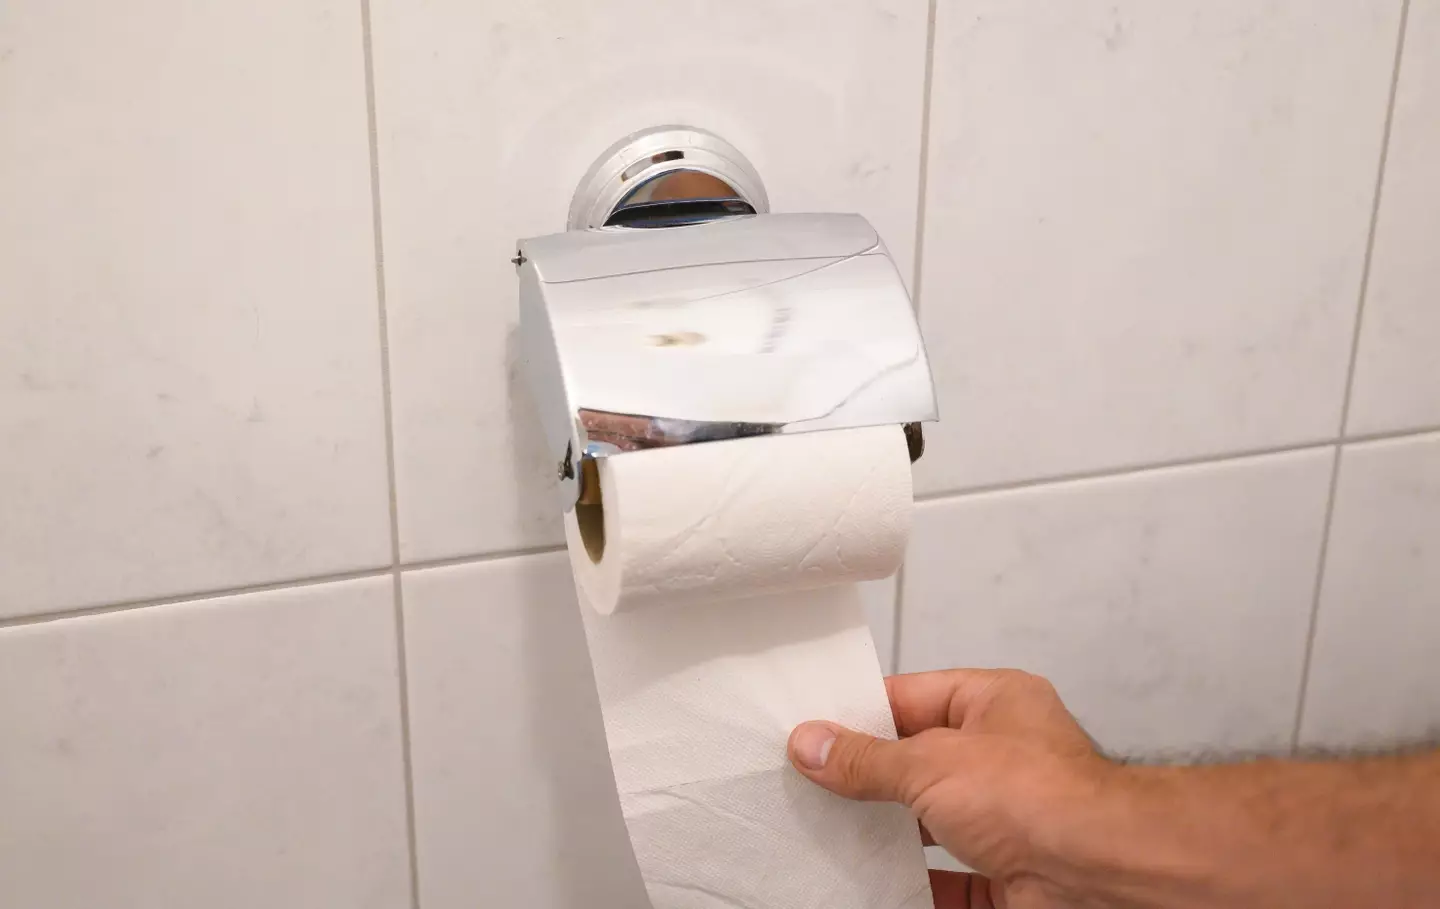 The way you hang your toilet roll might be all wrong in terms of etiquette and hygiene.